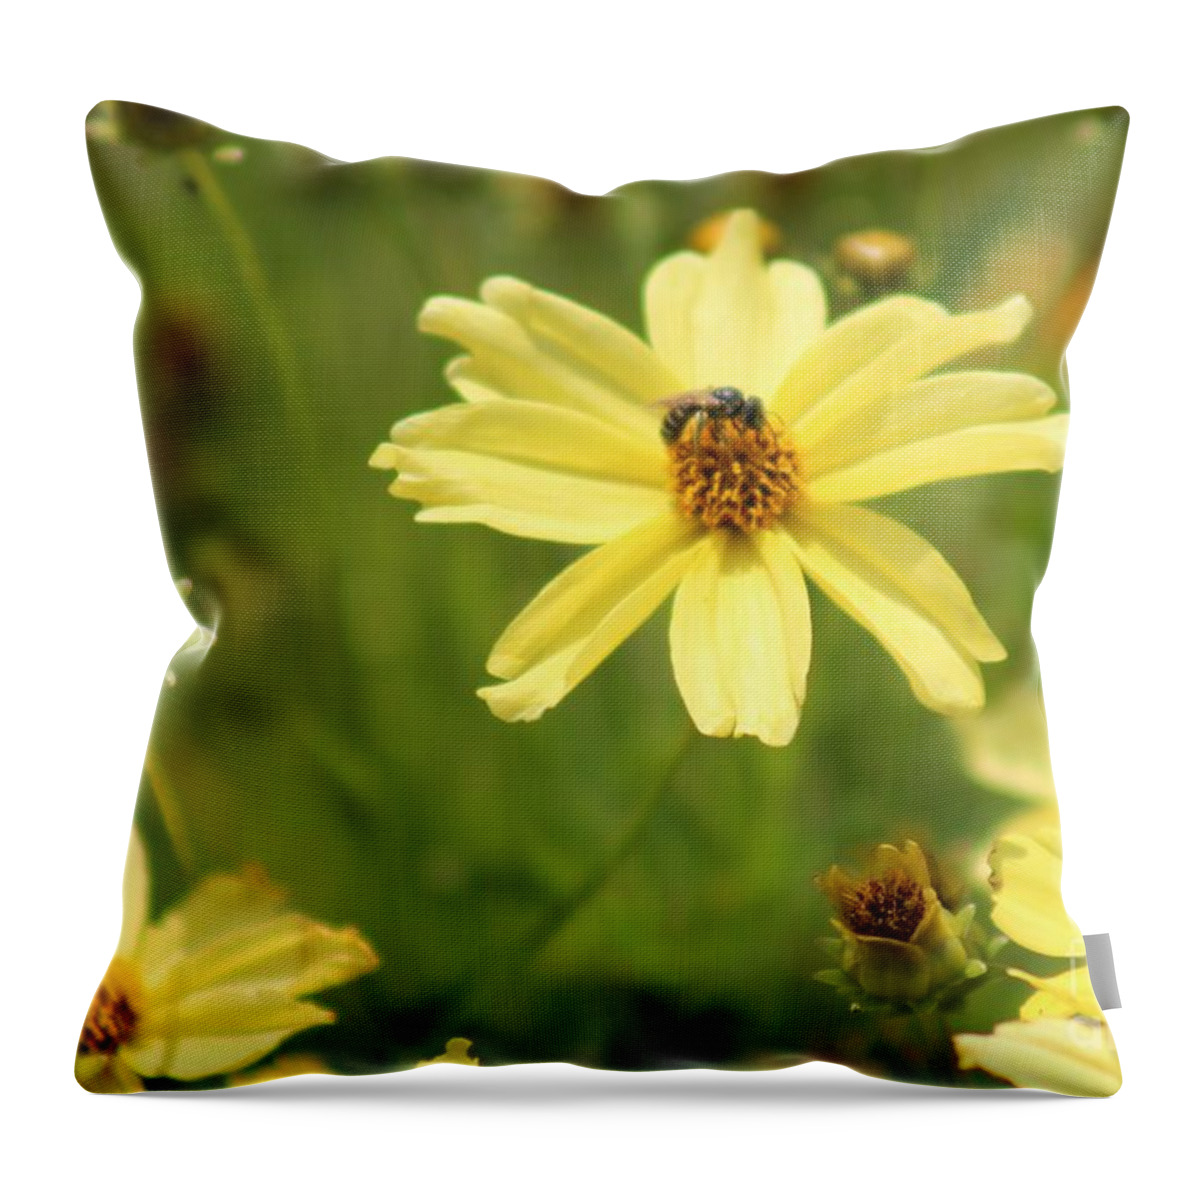 Yellow Throw Pillow featuring the photograph Nature's Beauty 62 by Deena Withycombe